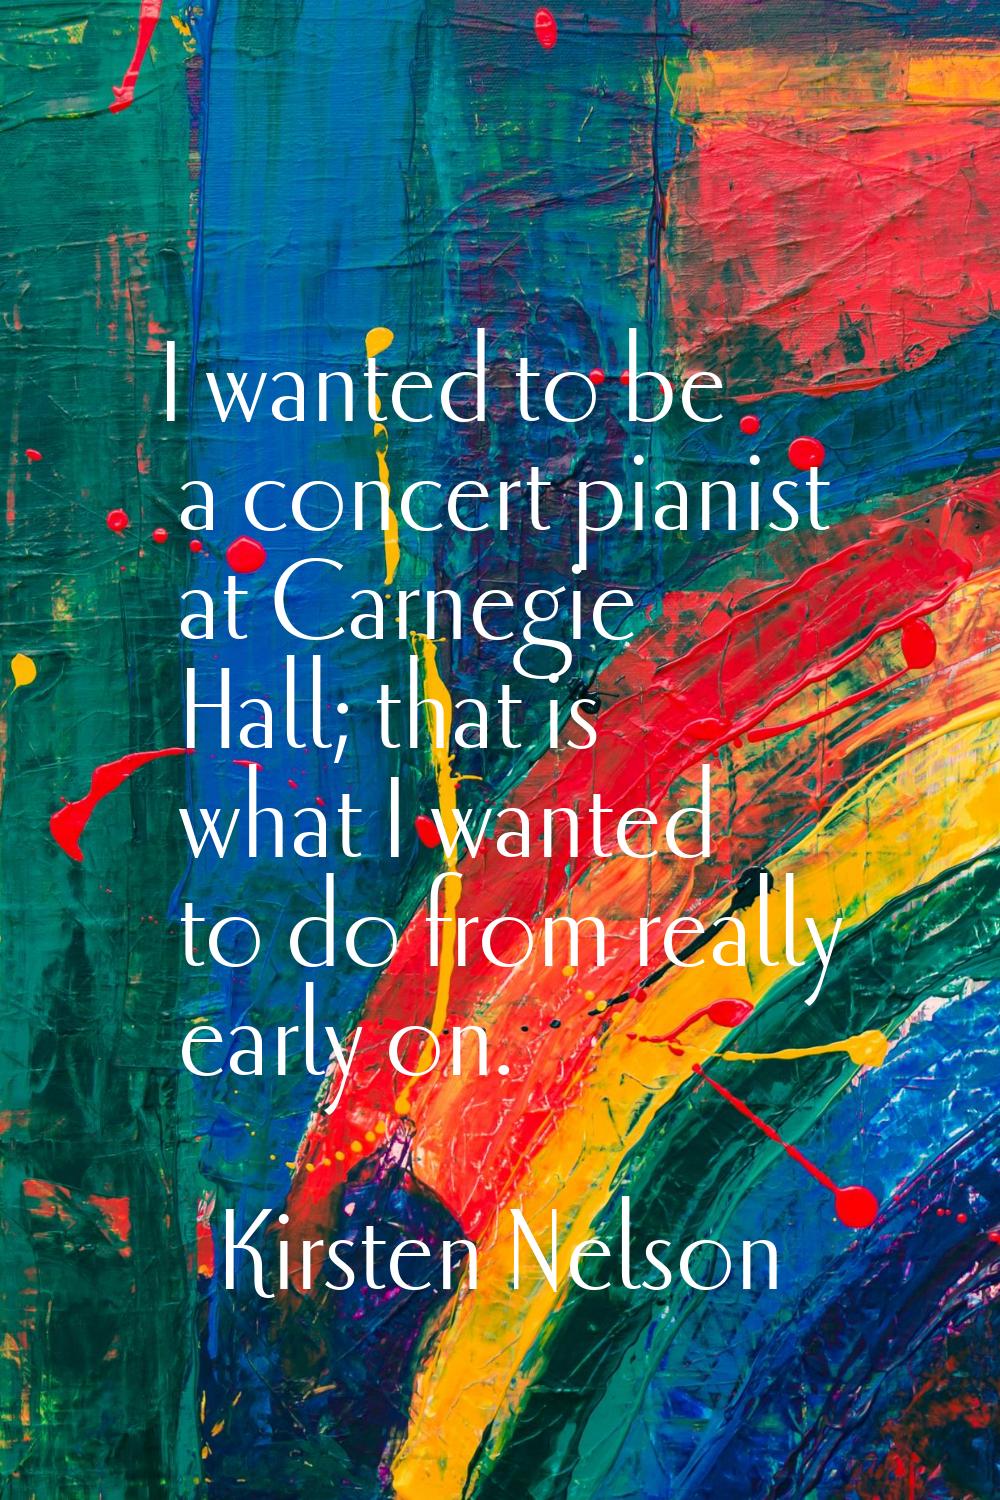 I wanted to be a concert pianist at Carnegie Hall; that is what I wanted to do from really early on